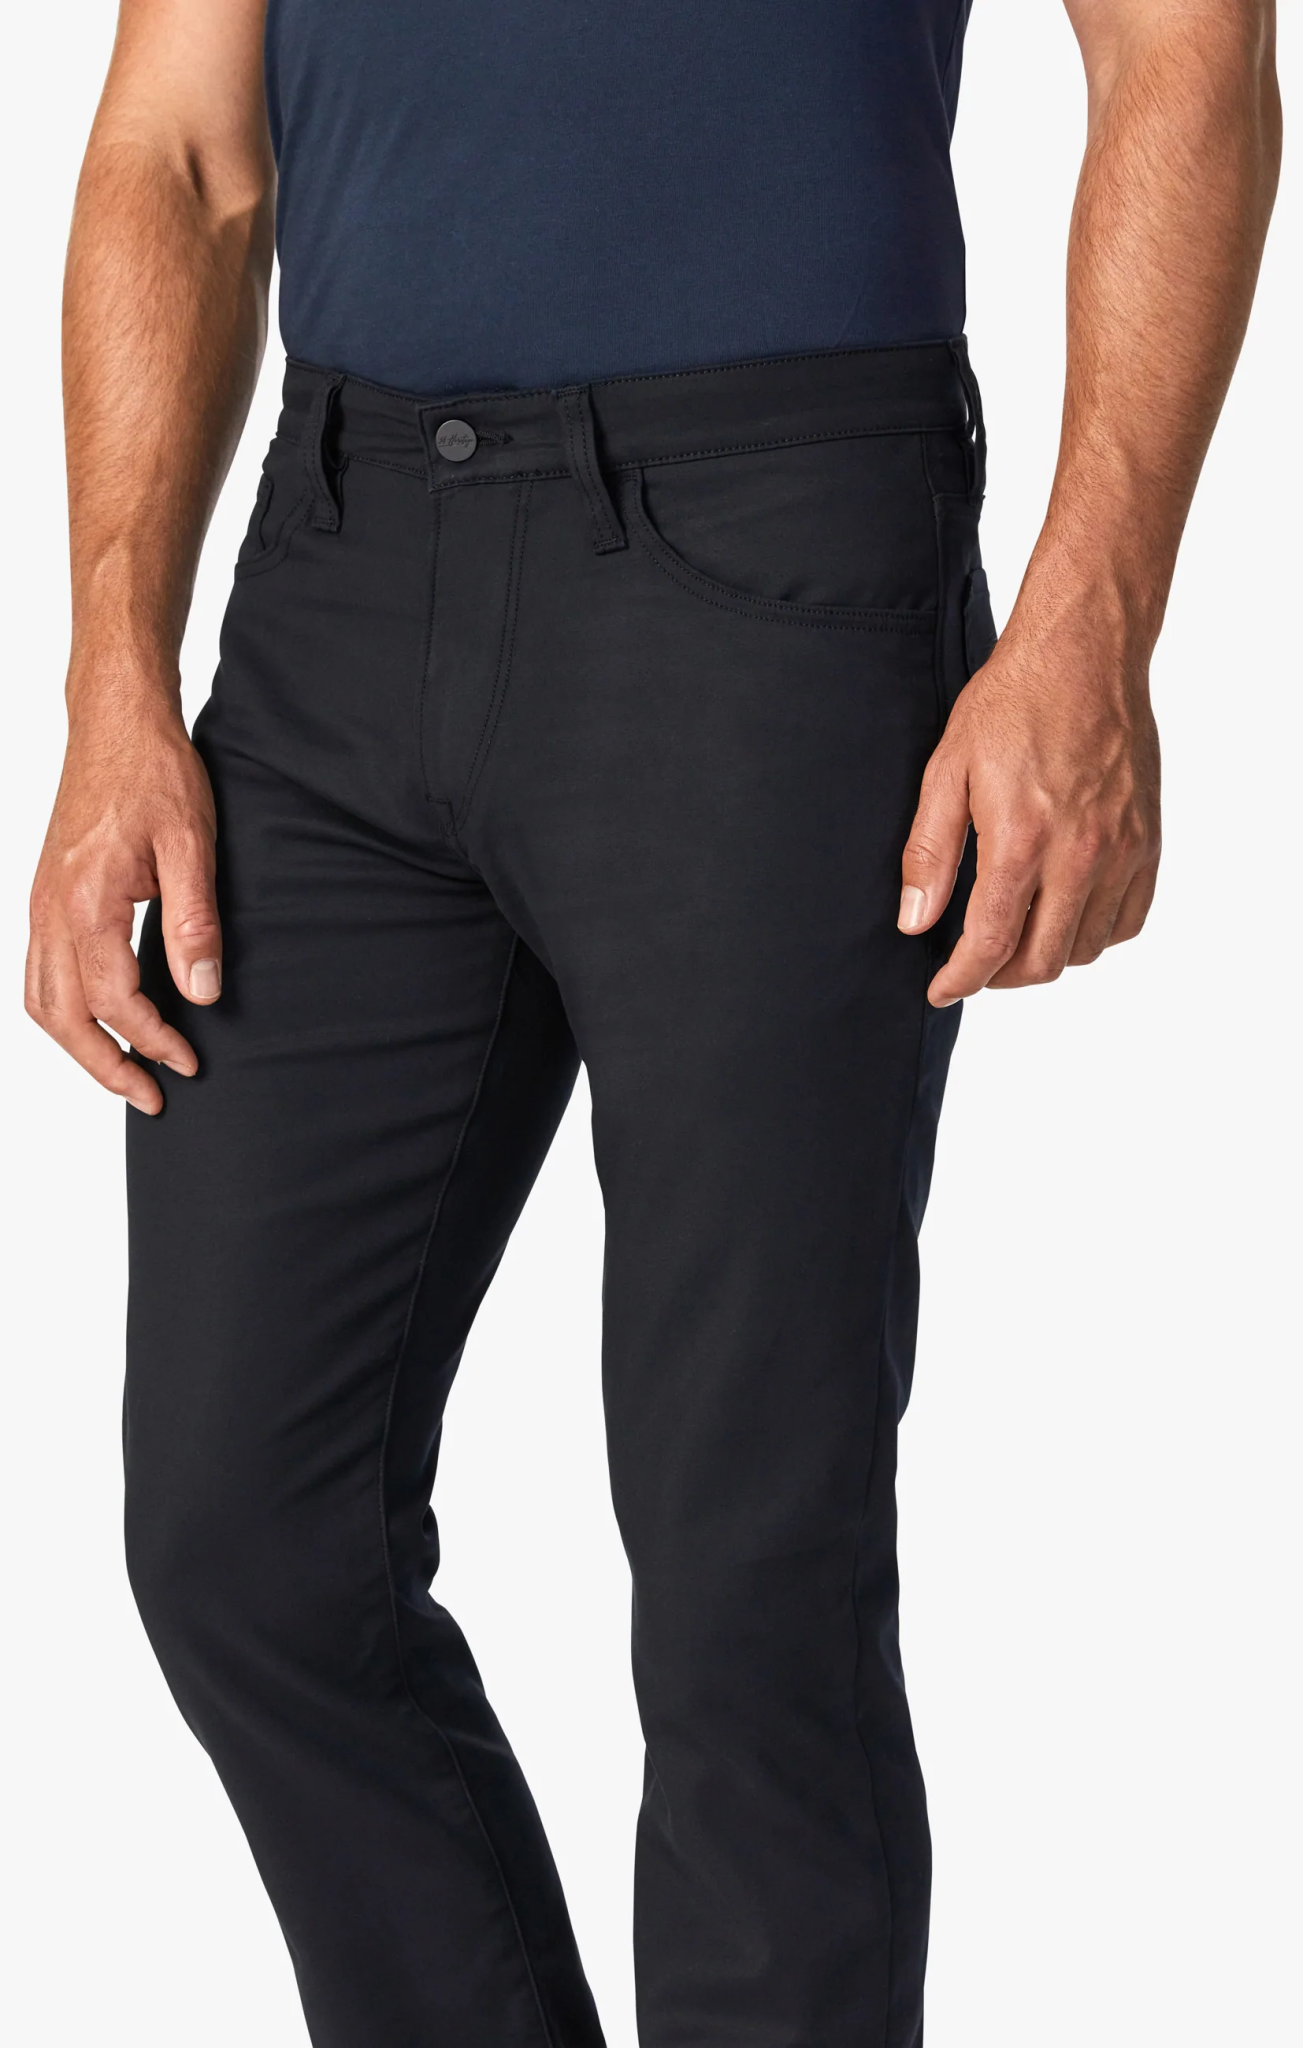 Courage Black High Flyer Pant